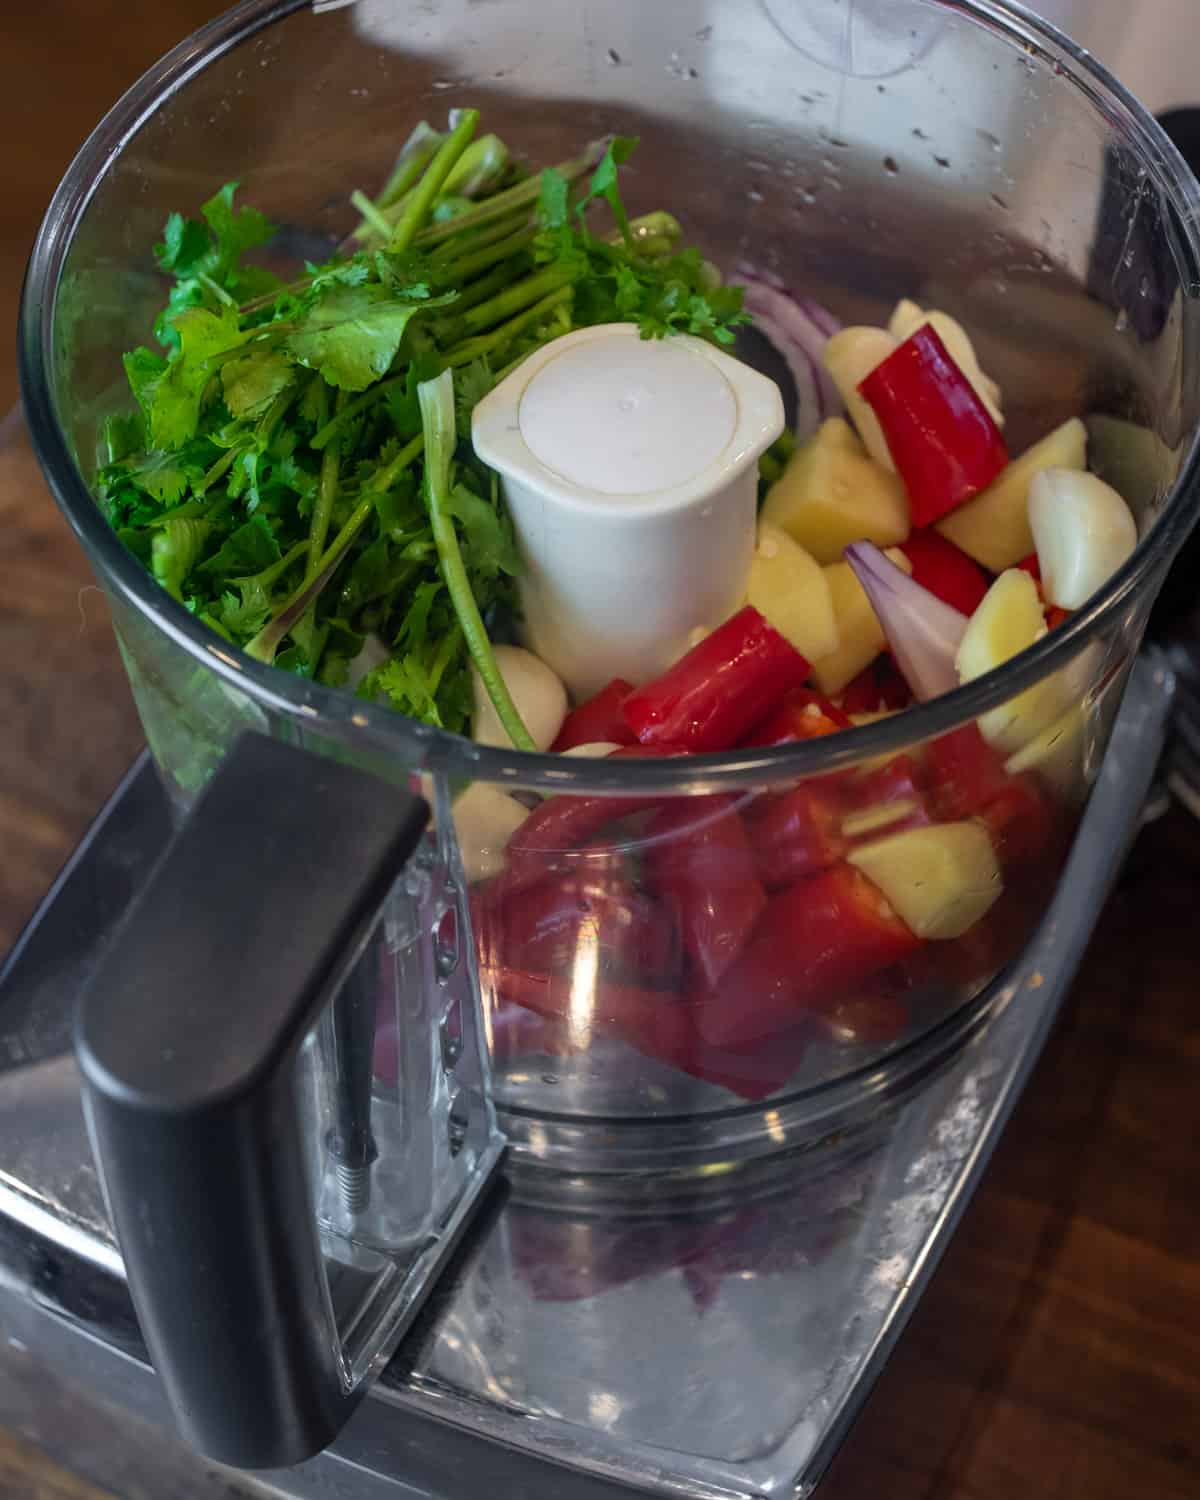 Chili peppers, cilantro, ginger and garlic in a food processor bowl.